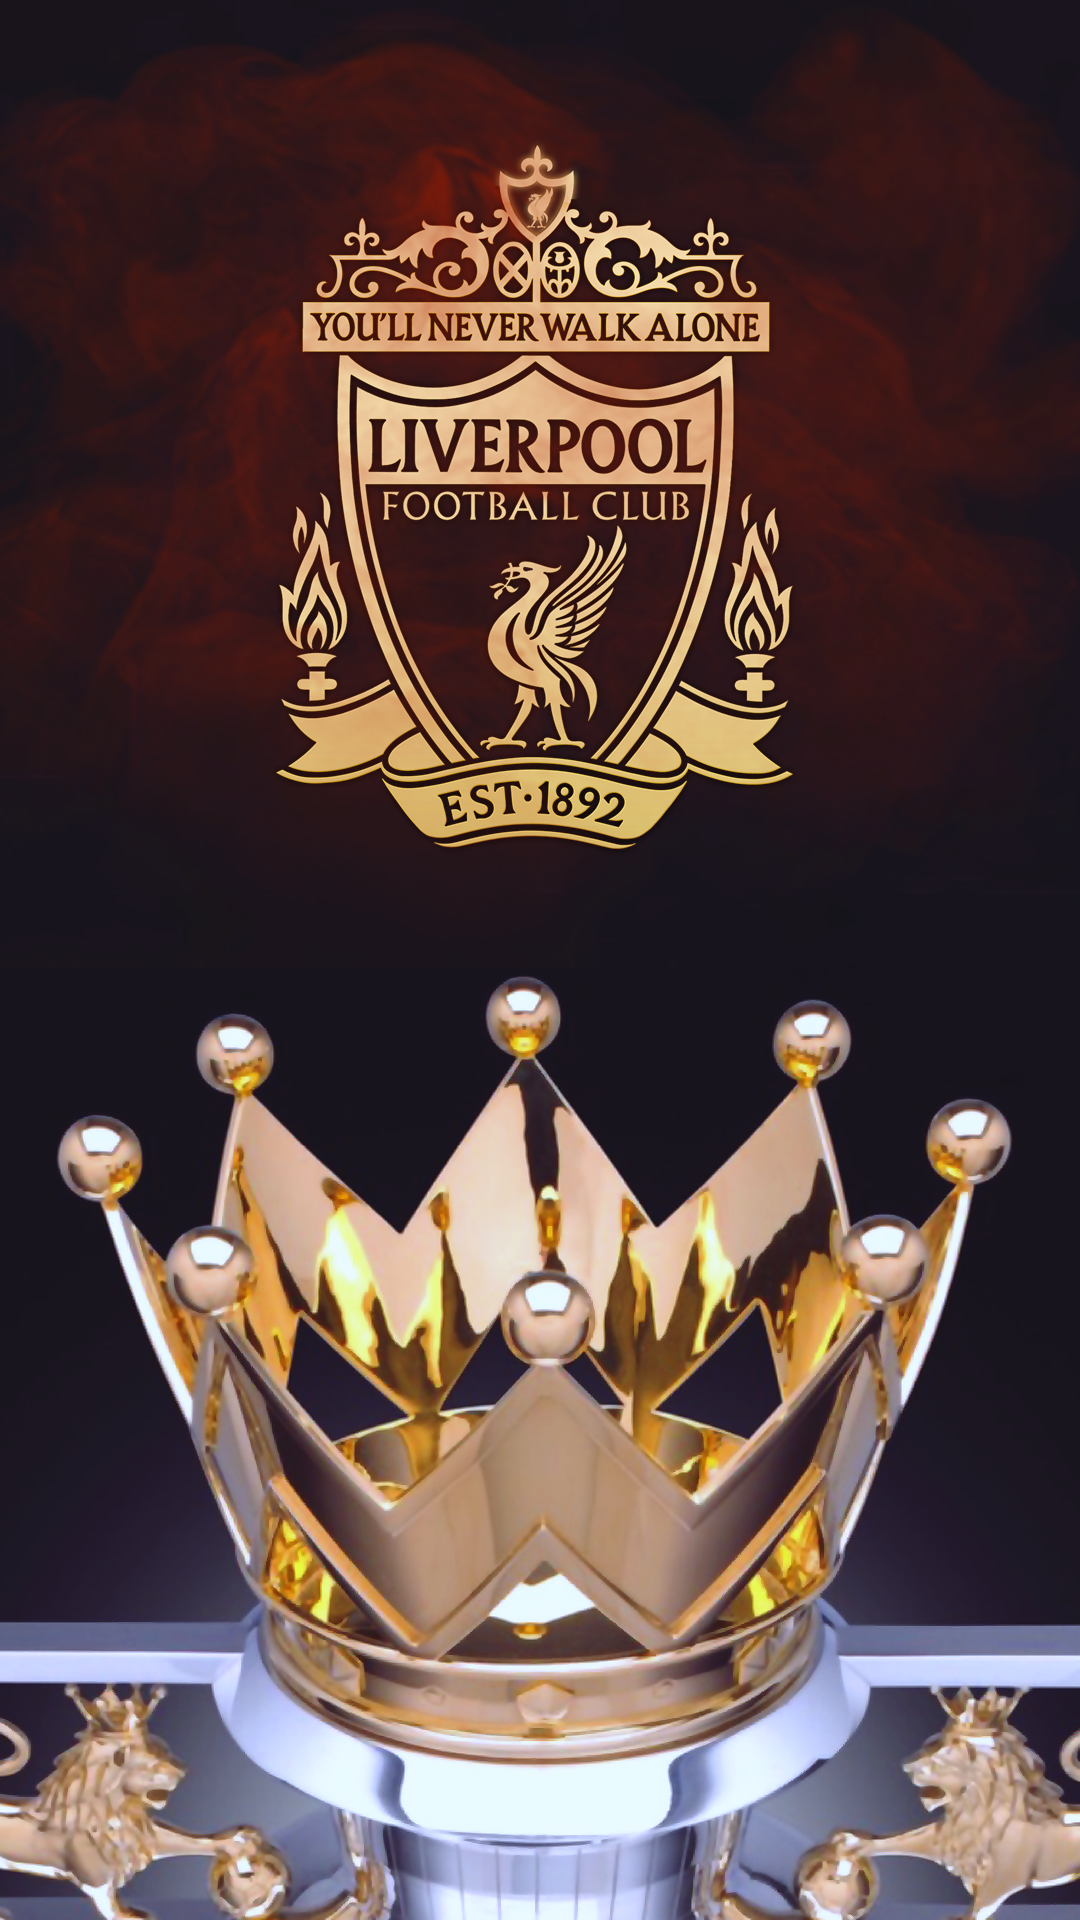 1080x1920, club, Desktop, Download, emblem, England, English, Football, High, Kingdom, League, leather, Liverpool, Liverpool FC Wallpapers 4k, Logo, pictures, Premier, Quality, Resolution, texture, United, wallpapers - Liverpool Legends in 4K Glory wallpapers logo Png